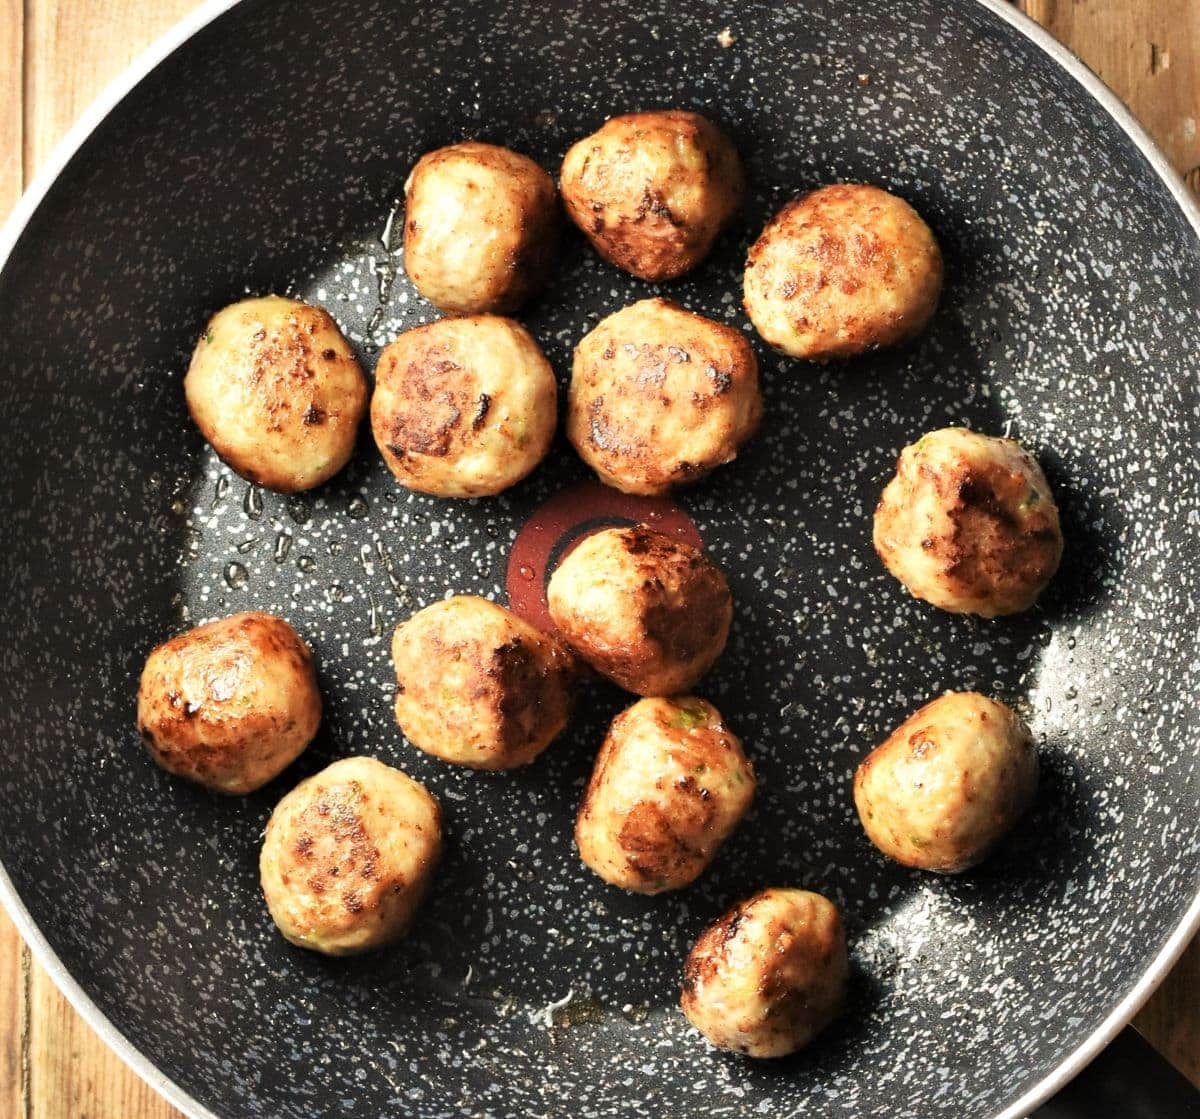 Fried meatballs in large pan.